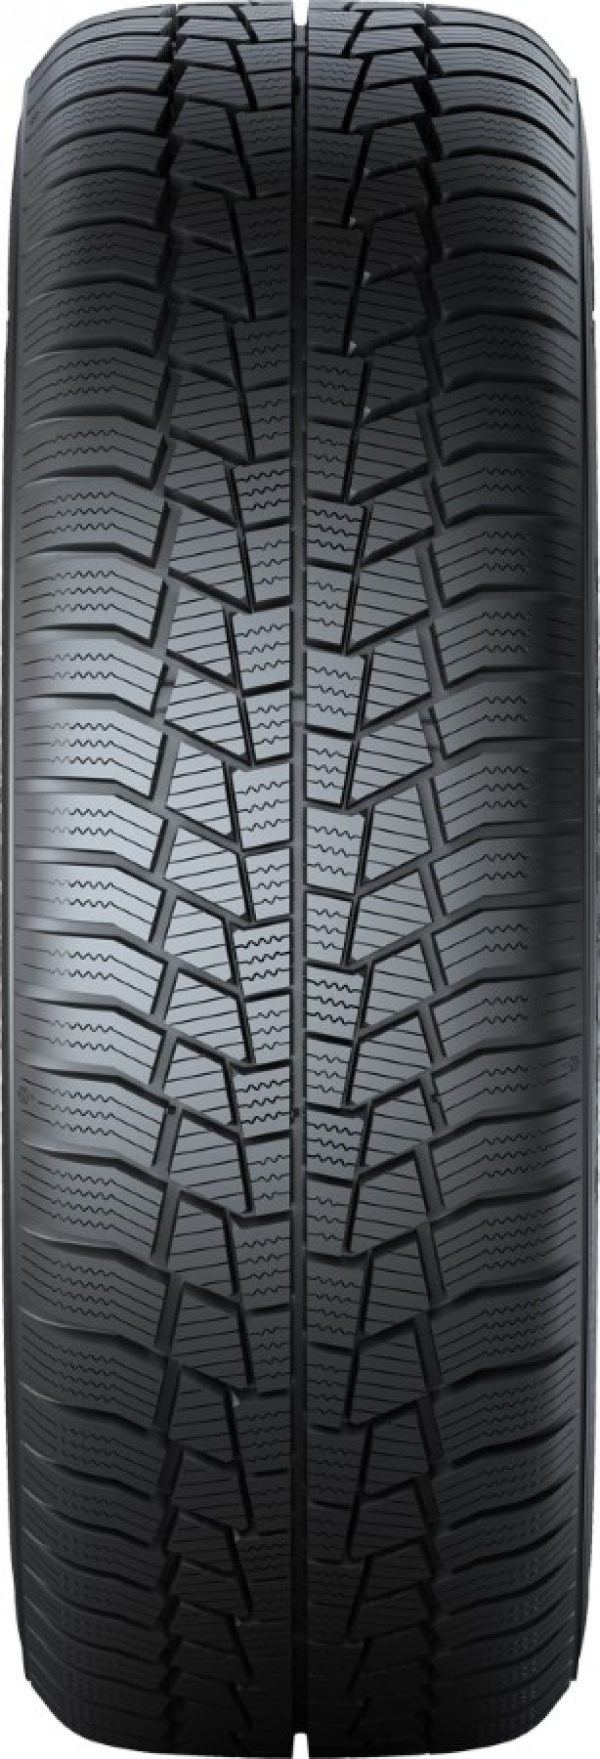 Gislaved Euro Frost 6 185/65 R14 86T  не шип